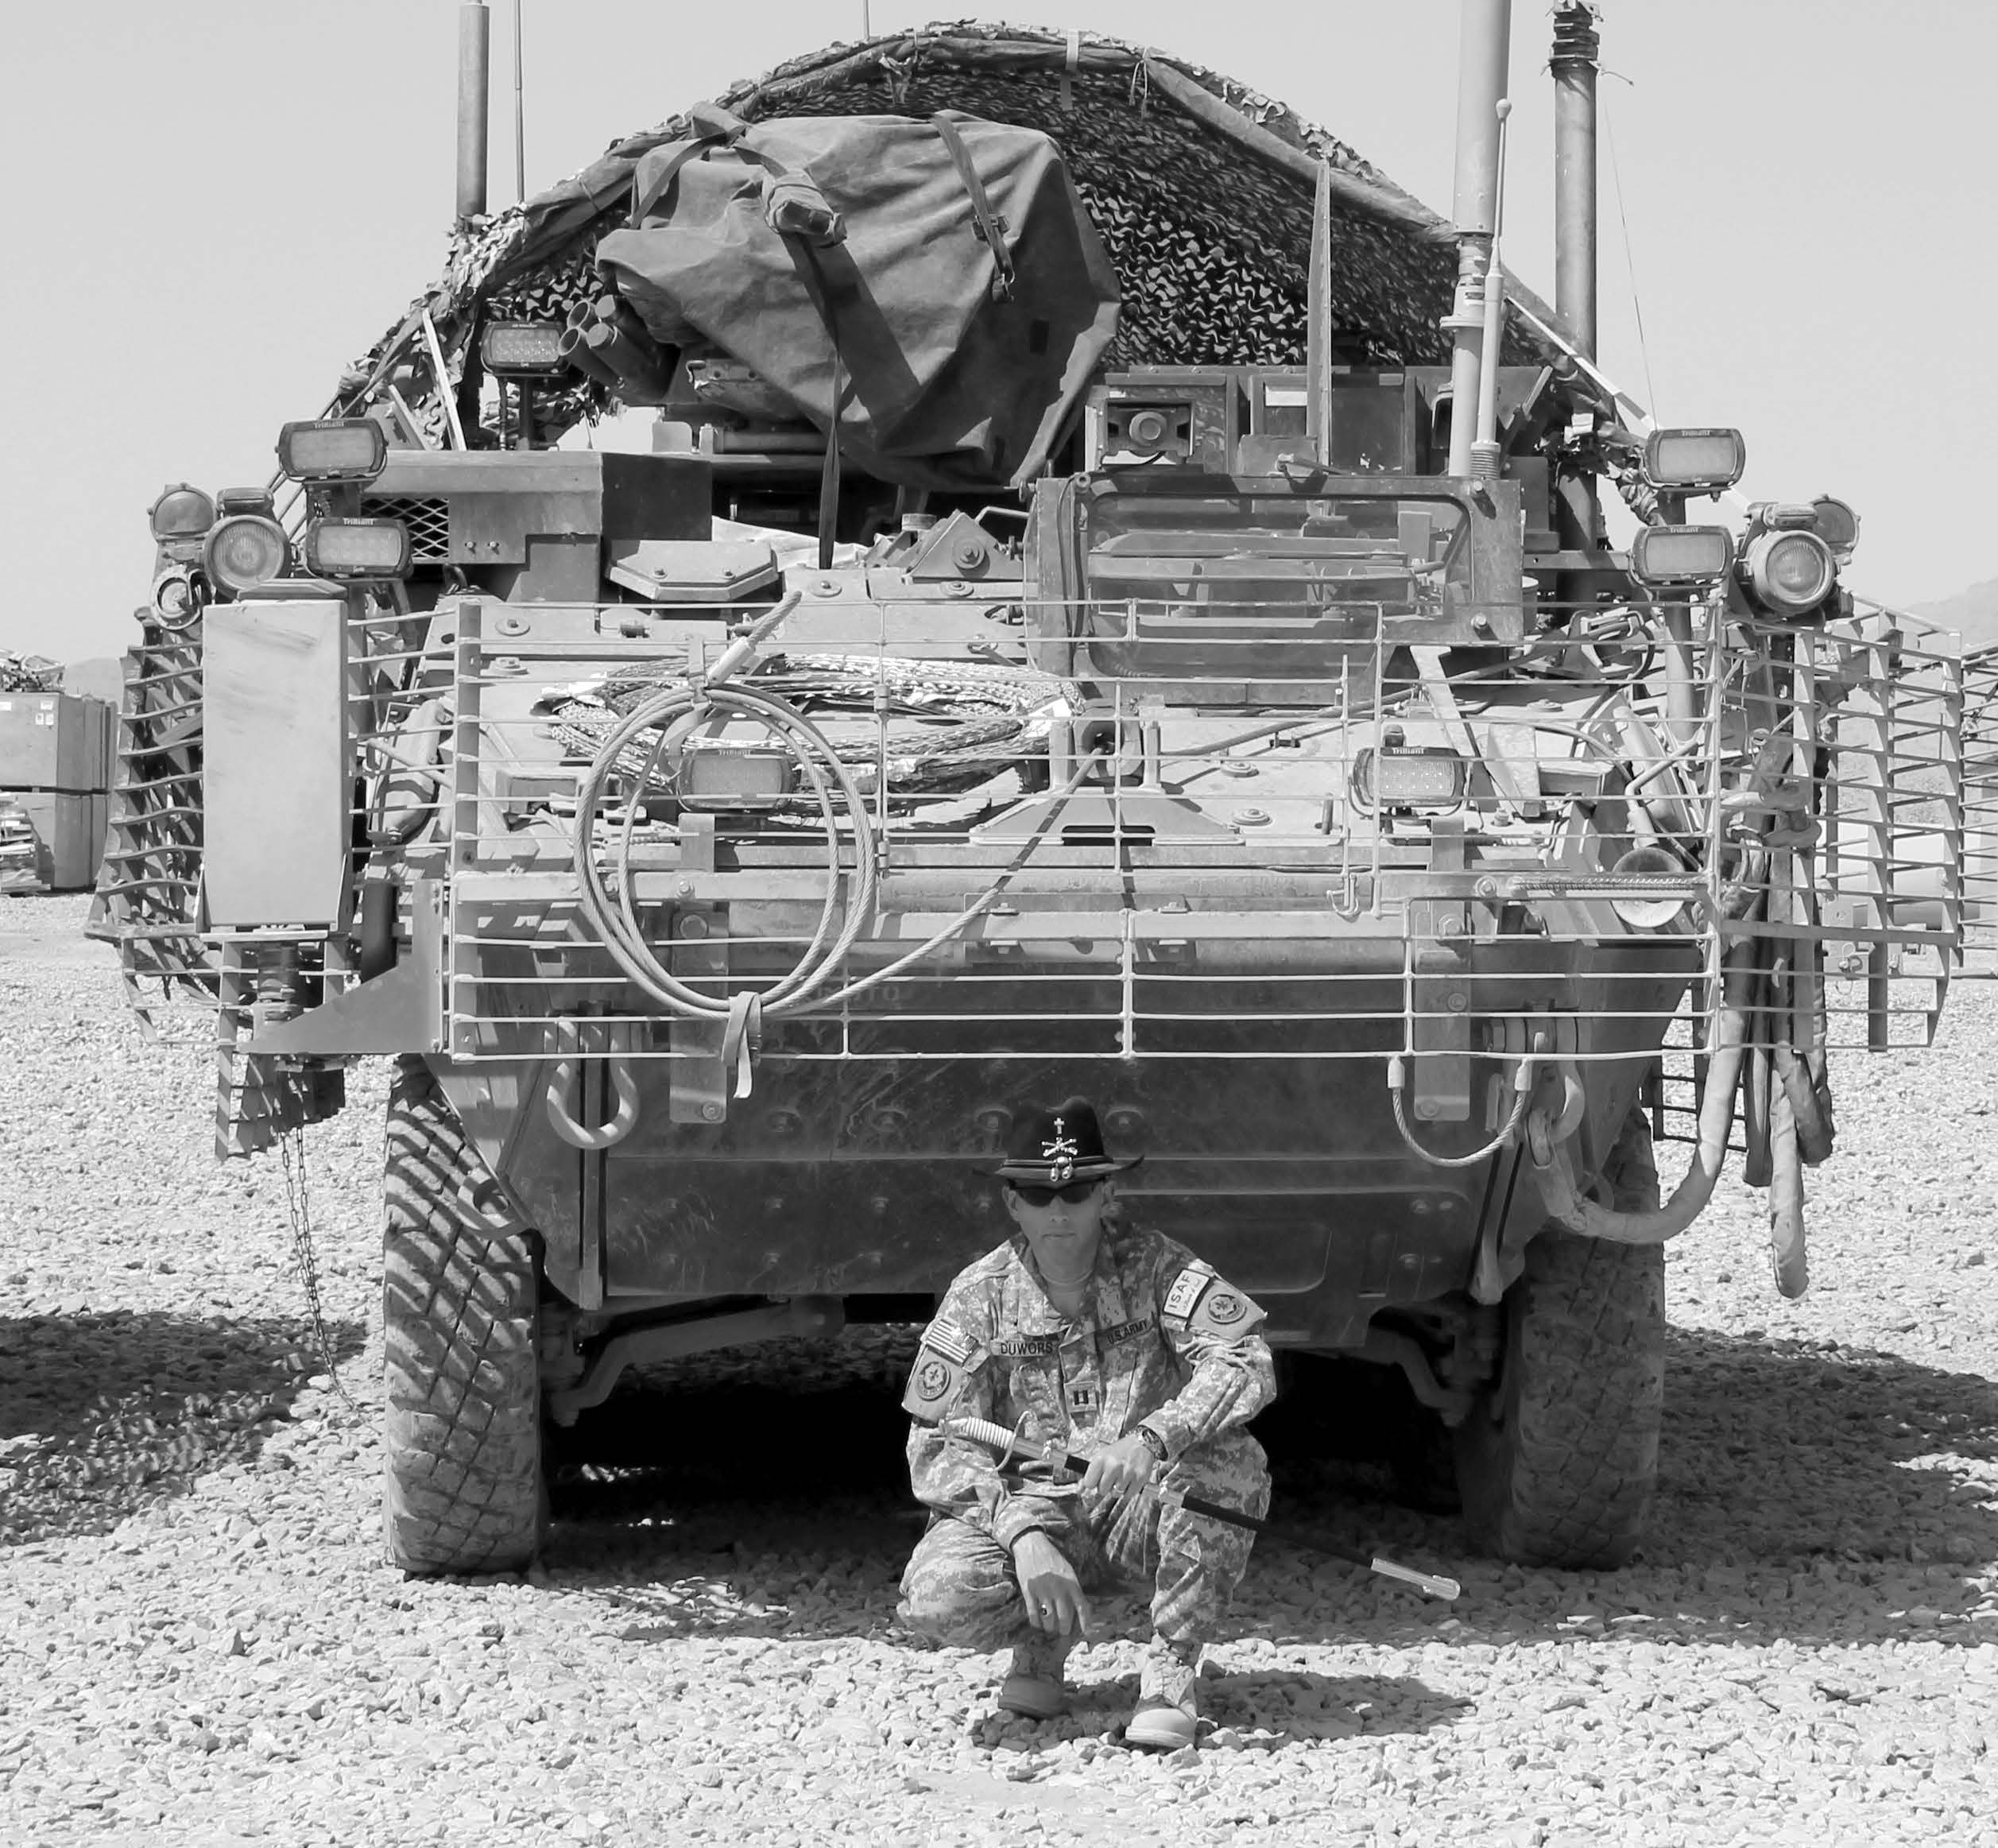 Latter-day Saint chaplain J. Joseph DuWors posing with a saber in front of a loaded Stryker vehicle. Courtesy of J. Joseph DuWors.